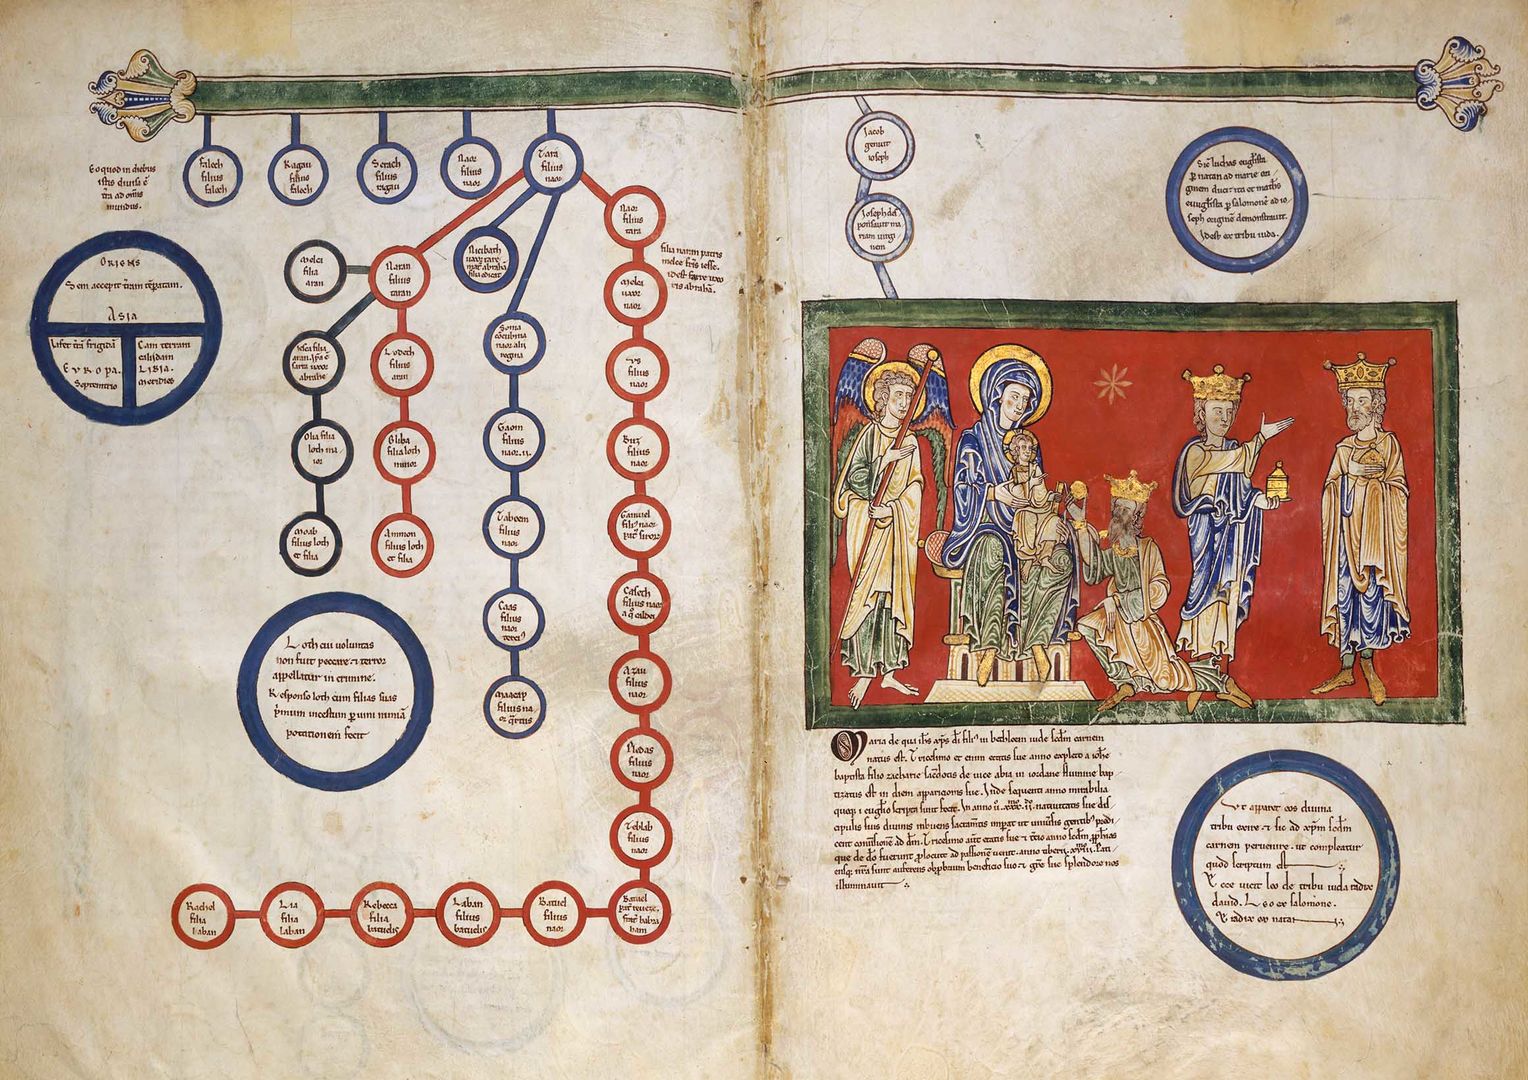 A bifold from an Austrian manuscript with an illustration of the magi presenting gifts to Mary and Jesus